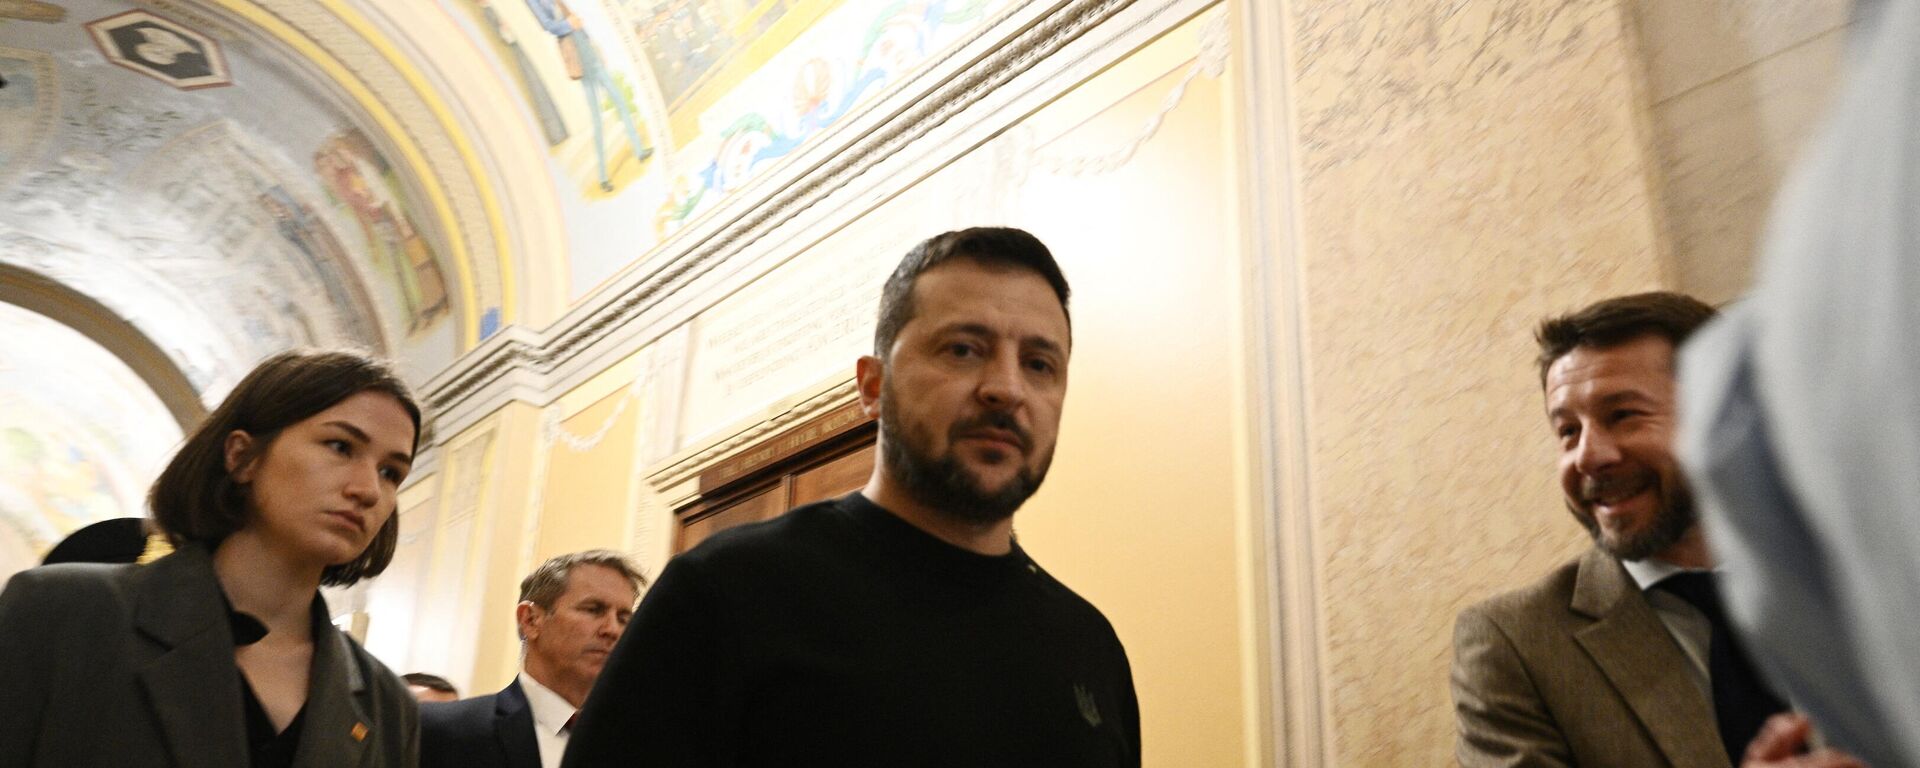 Ukrainian President Volodymyr Zelensky  walks through the US Capitol as he meets with lawmakers on Capitol Hill in Washington, DC, on December 12, 2023. - Sputnik Србија, 1920, 13.12.2023